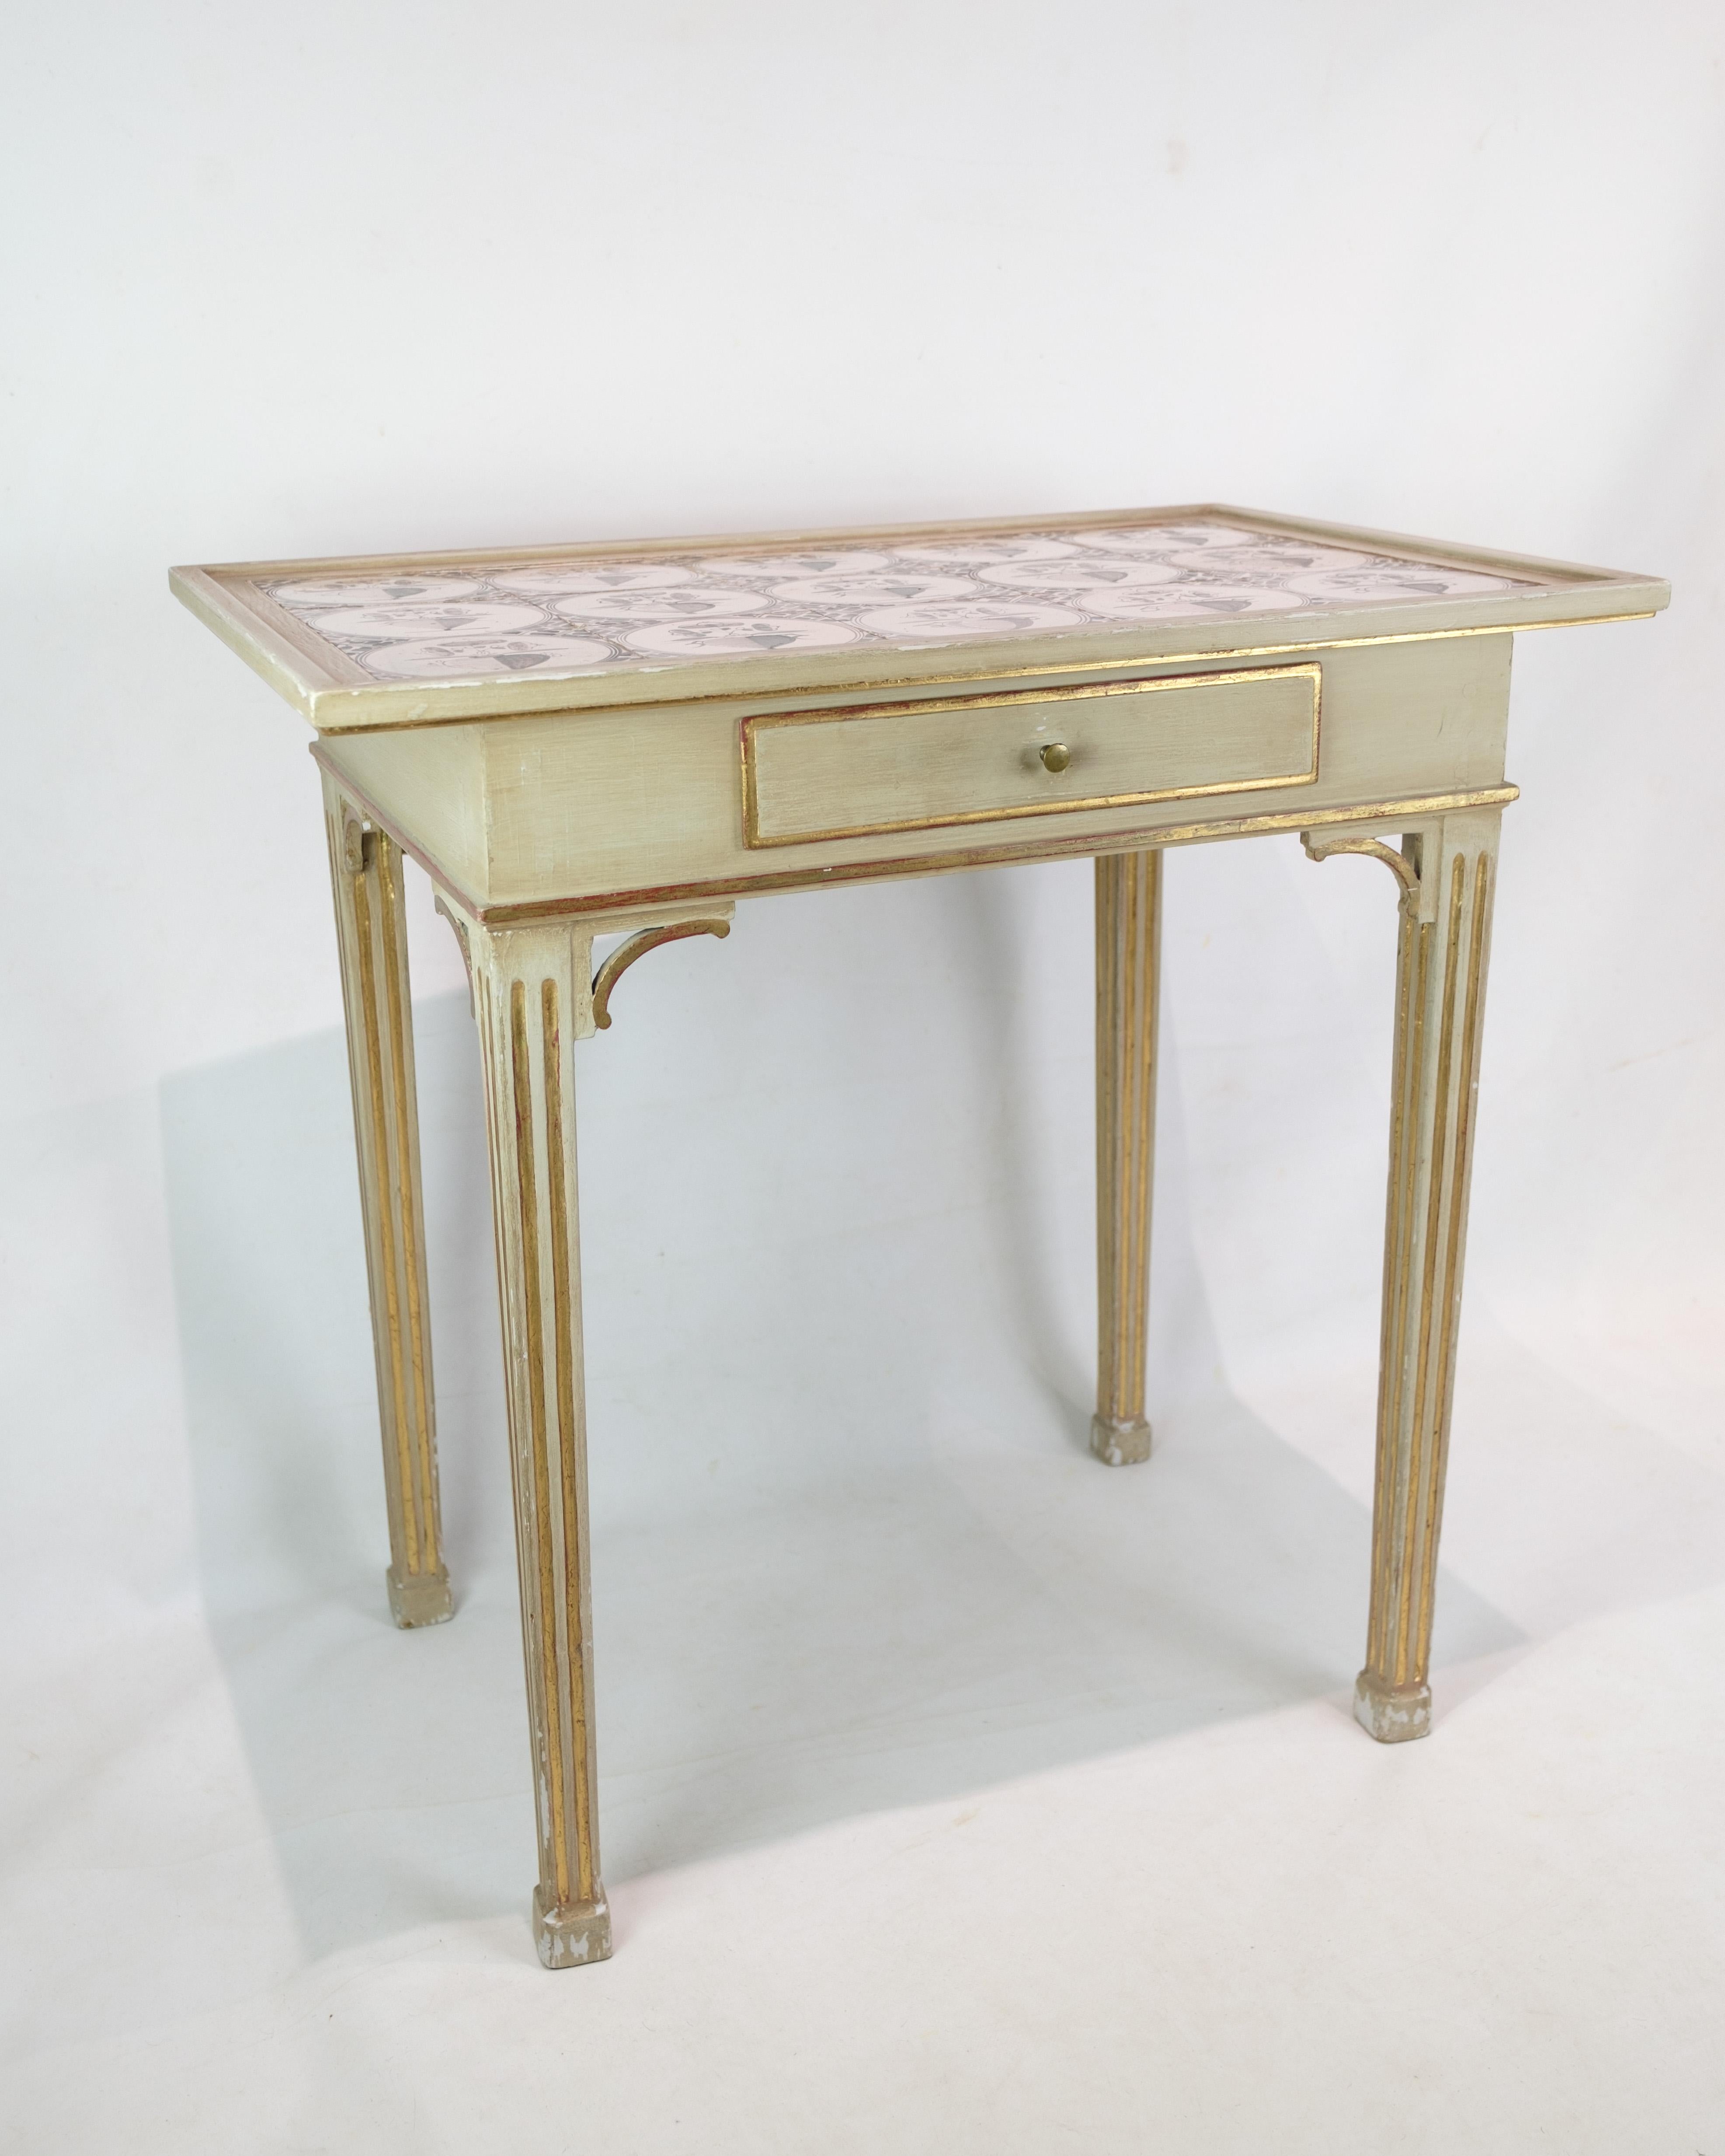 This painted tile table represents a distinguished heritage of artisanal elegance and historical sophistication. In a distinctive Gustavian and Louis XVI style, this table is a timeless work of art from the 19th century.

The table is adorned with